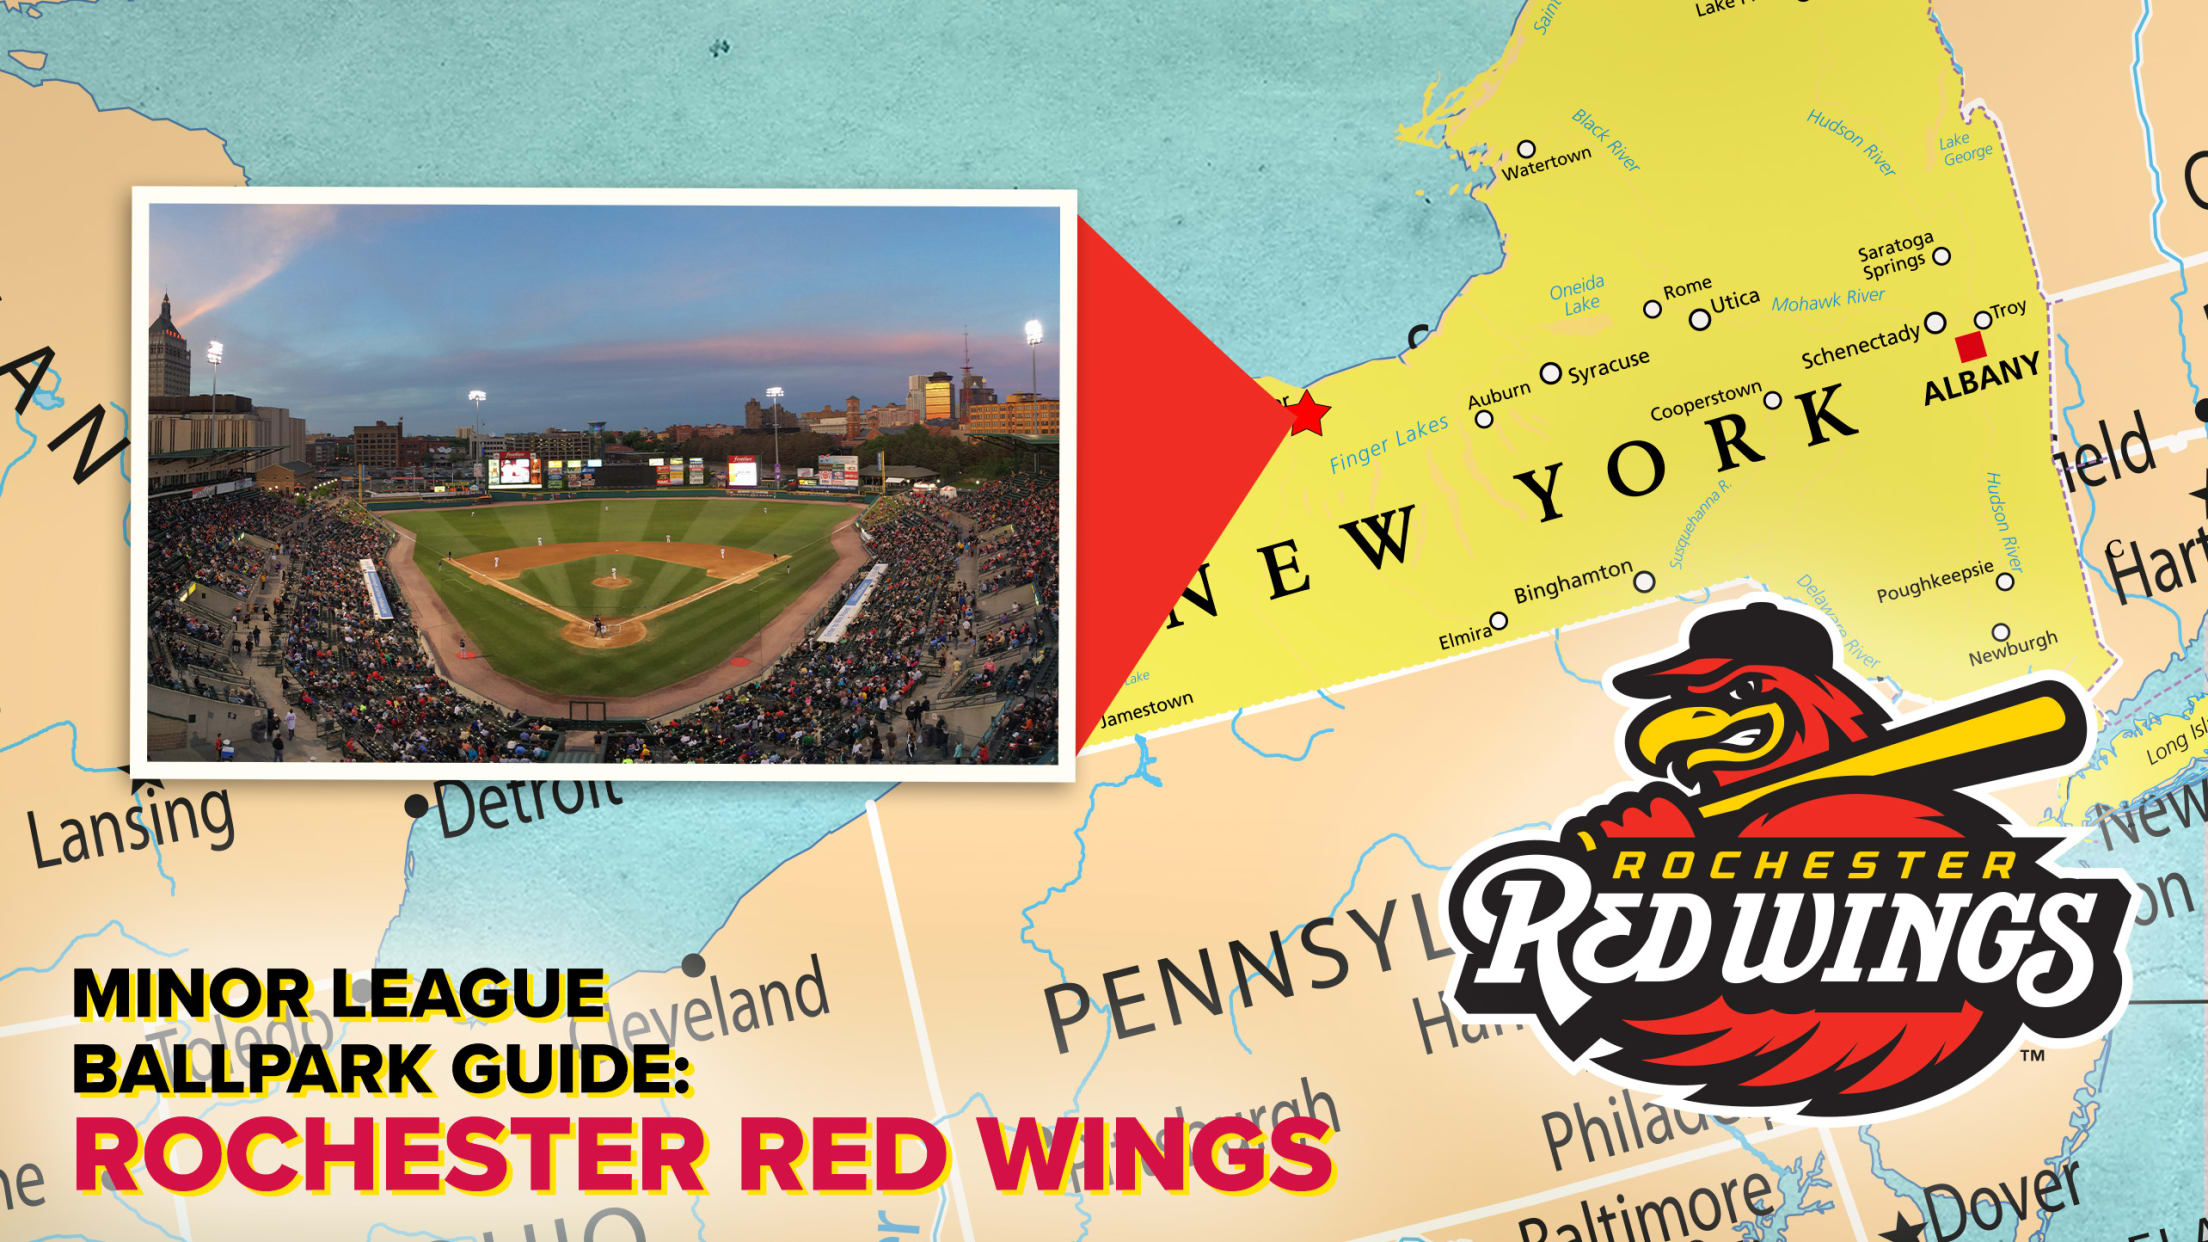 2568x1445_Rochester Red Wings (1)